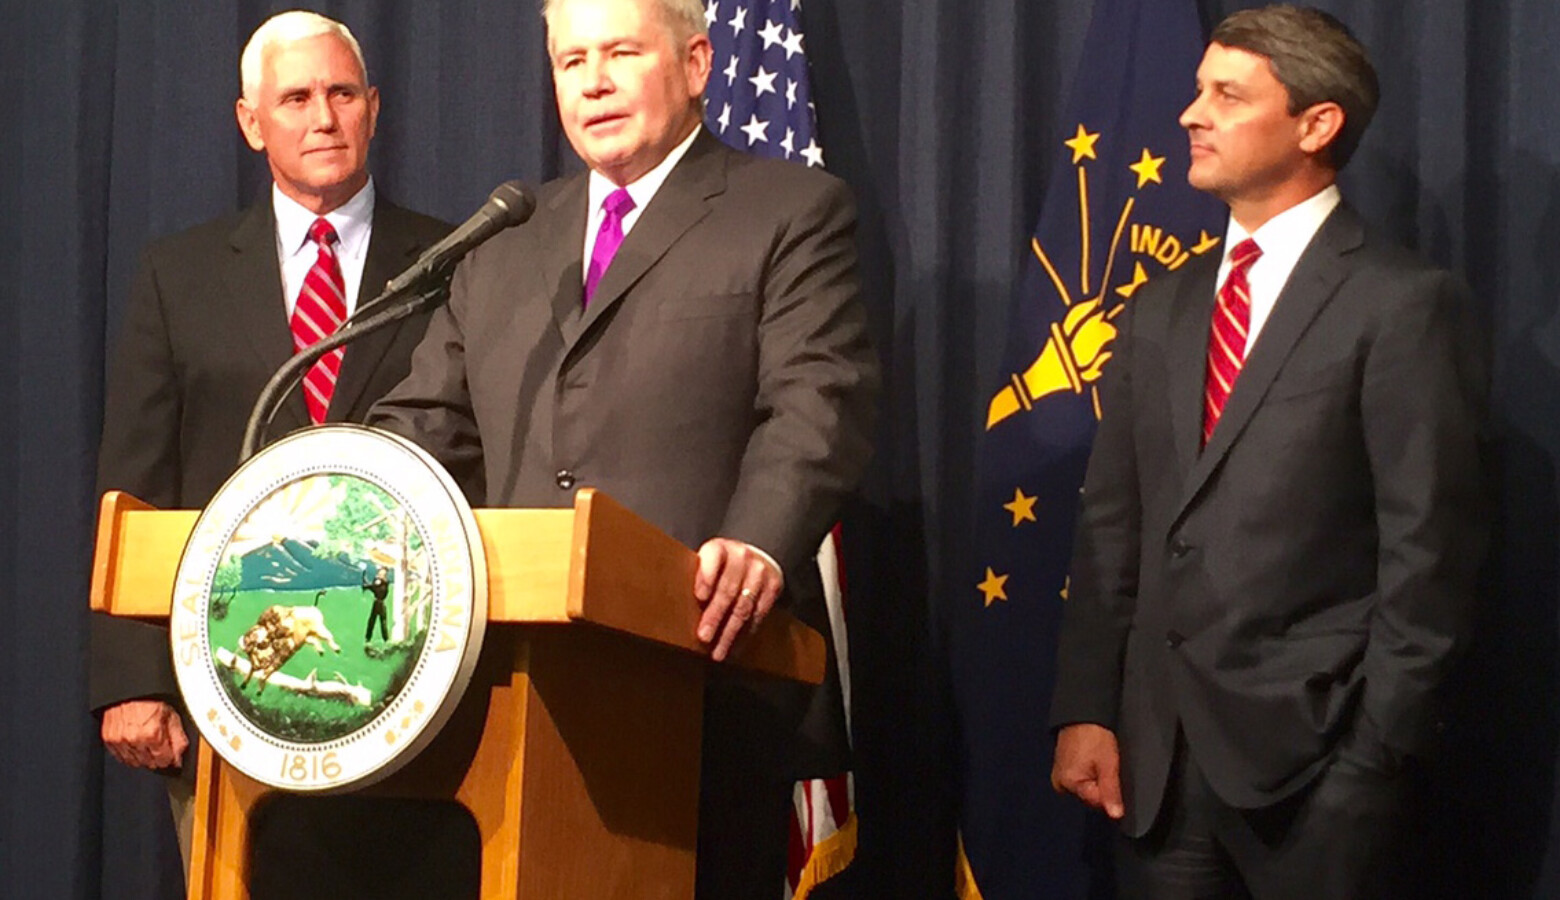 Jim Schellinger, center, was named the head of the Indiana Economic Development Corporation in 2015 by then-Gov. Mike Pence, left.